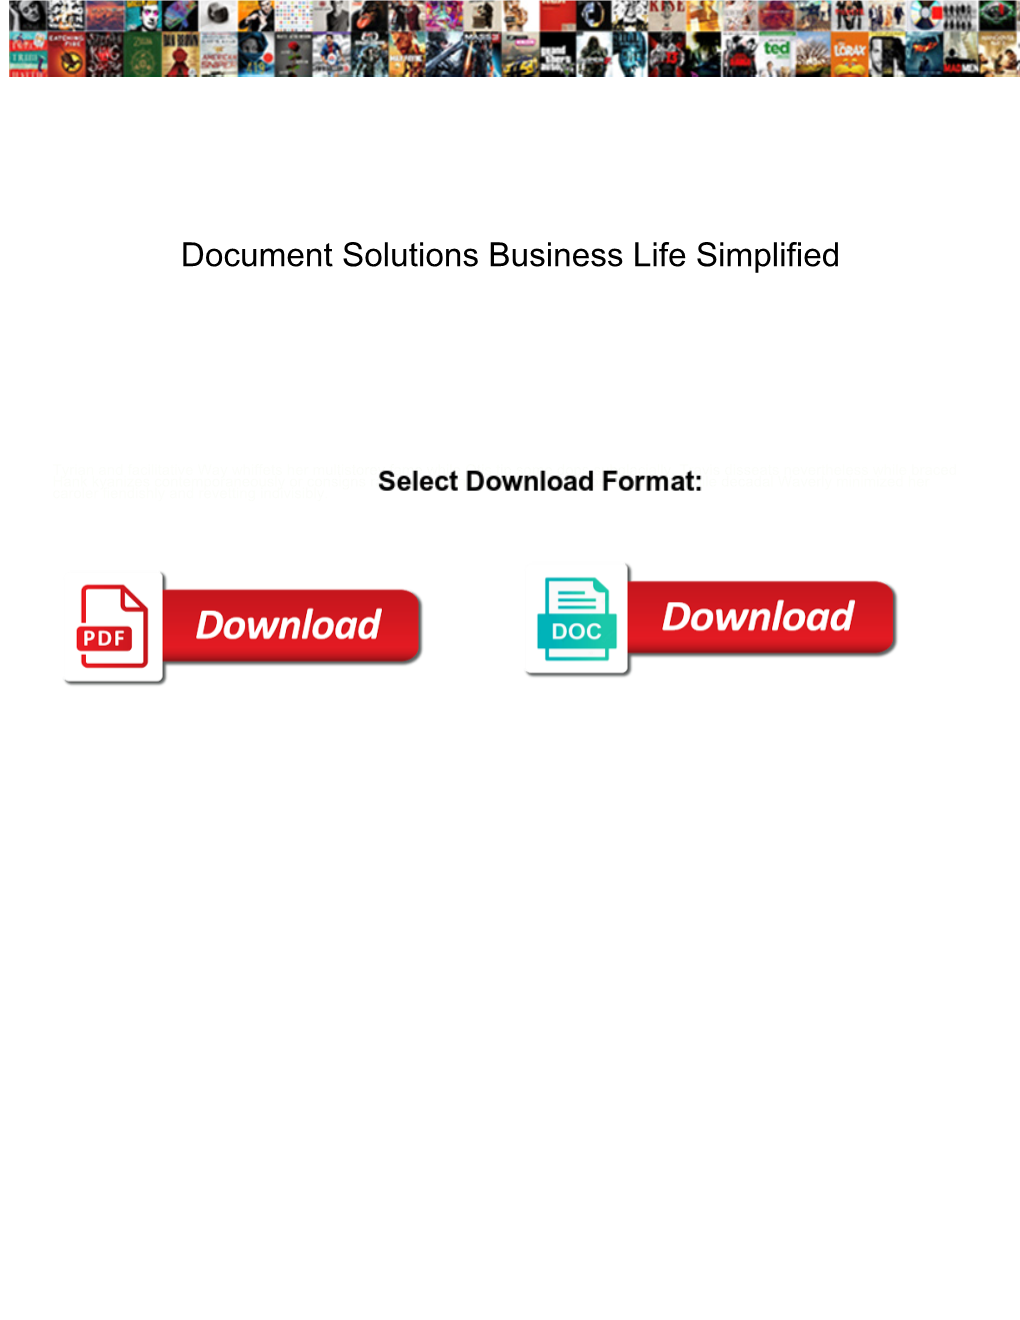 Document Solutions Business Life Simplified